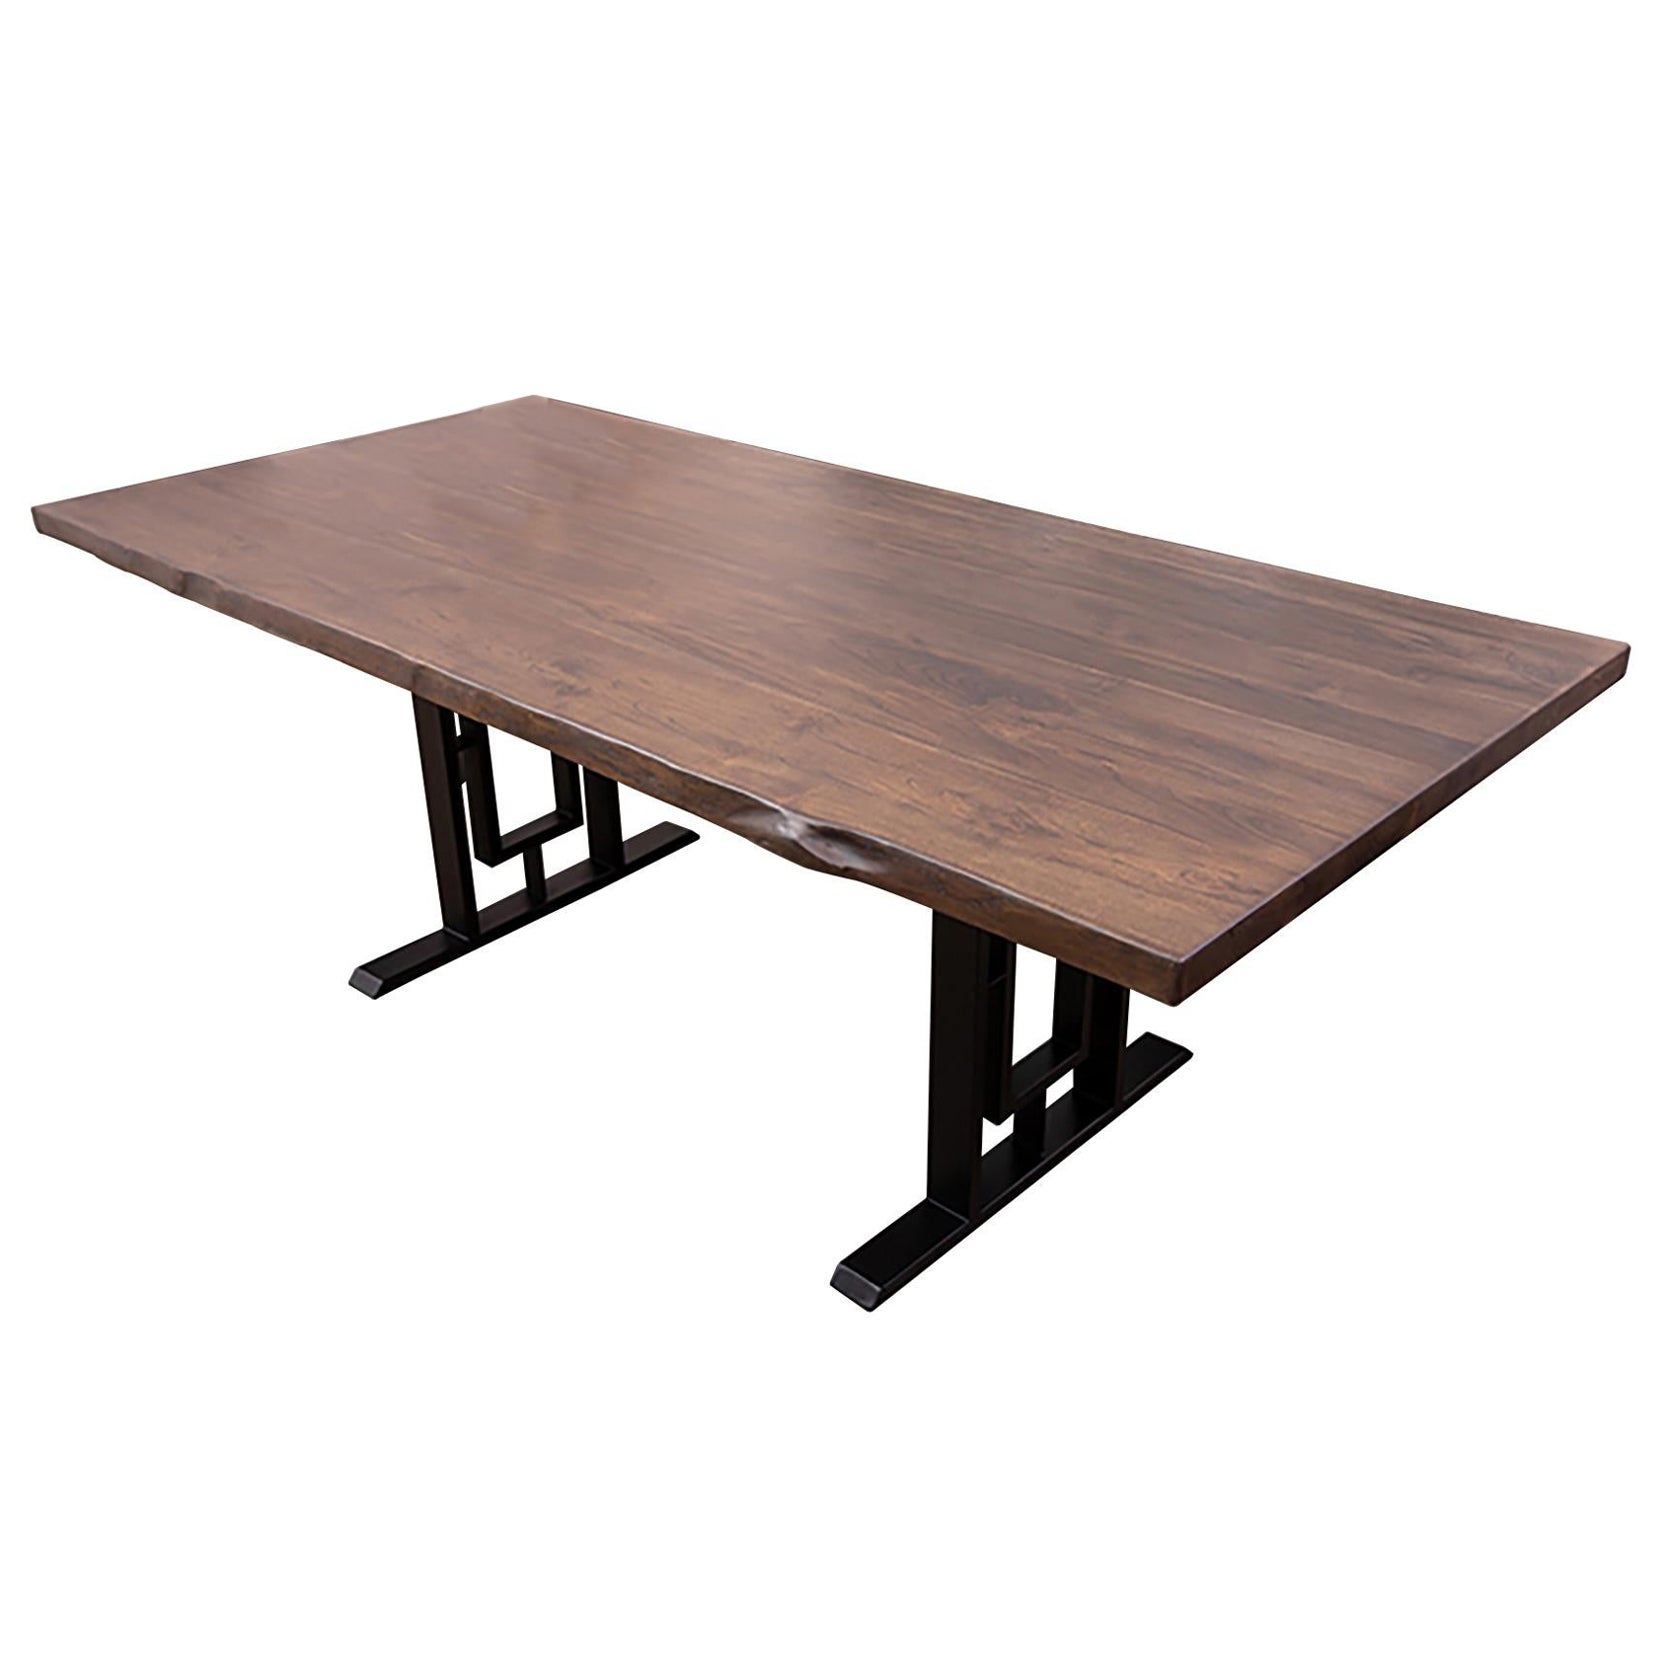 100% Solid Teak Live Edge Dining Table in a Smooth Cocoa Finish For Sale